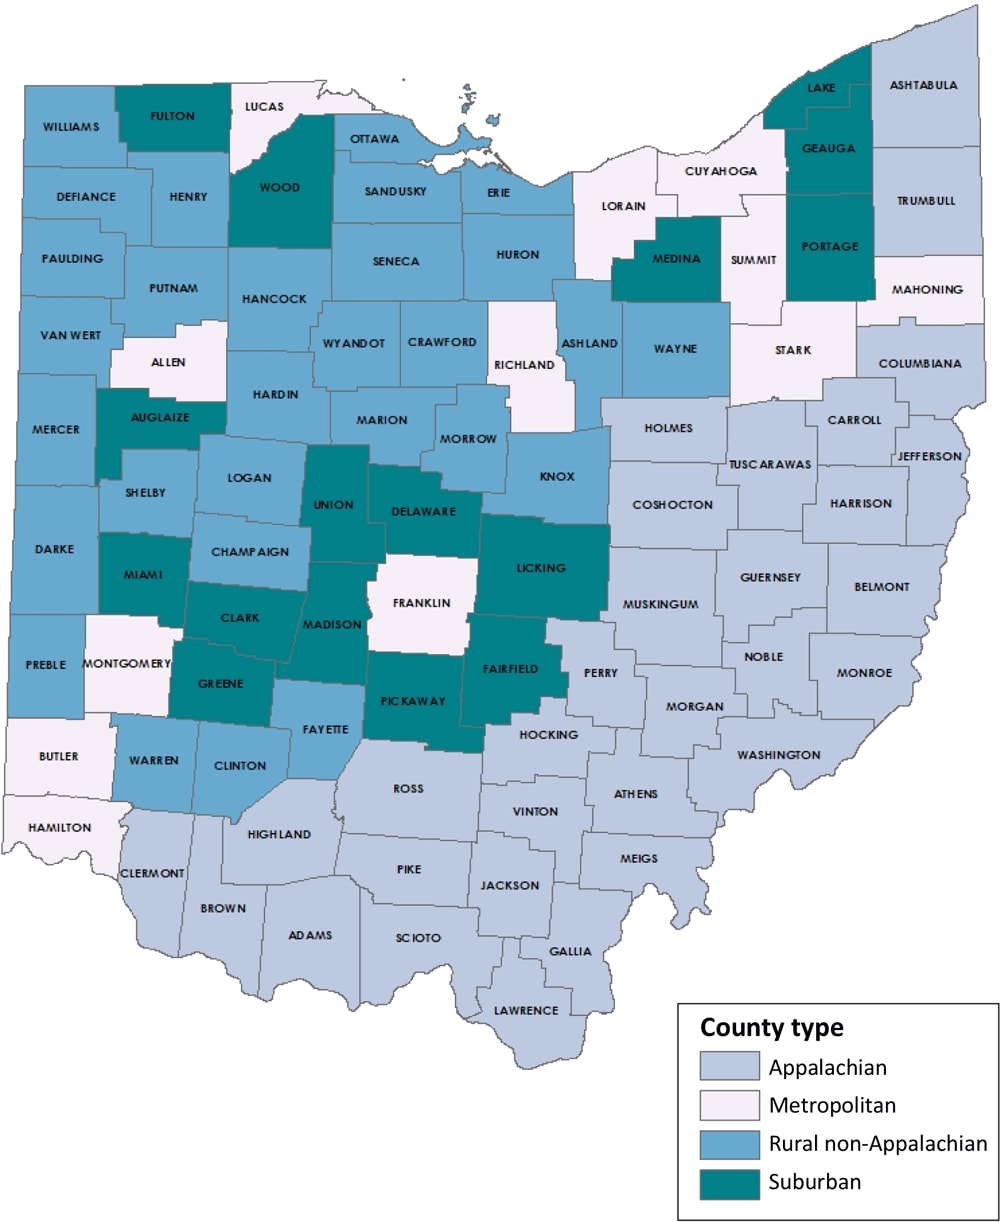 Ohio county types, developed by Ohio Department of Health, Bureau of Vital Statistics based on county population size and county designation by the Appalachian Regional Commission (7).